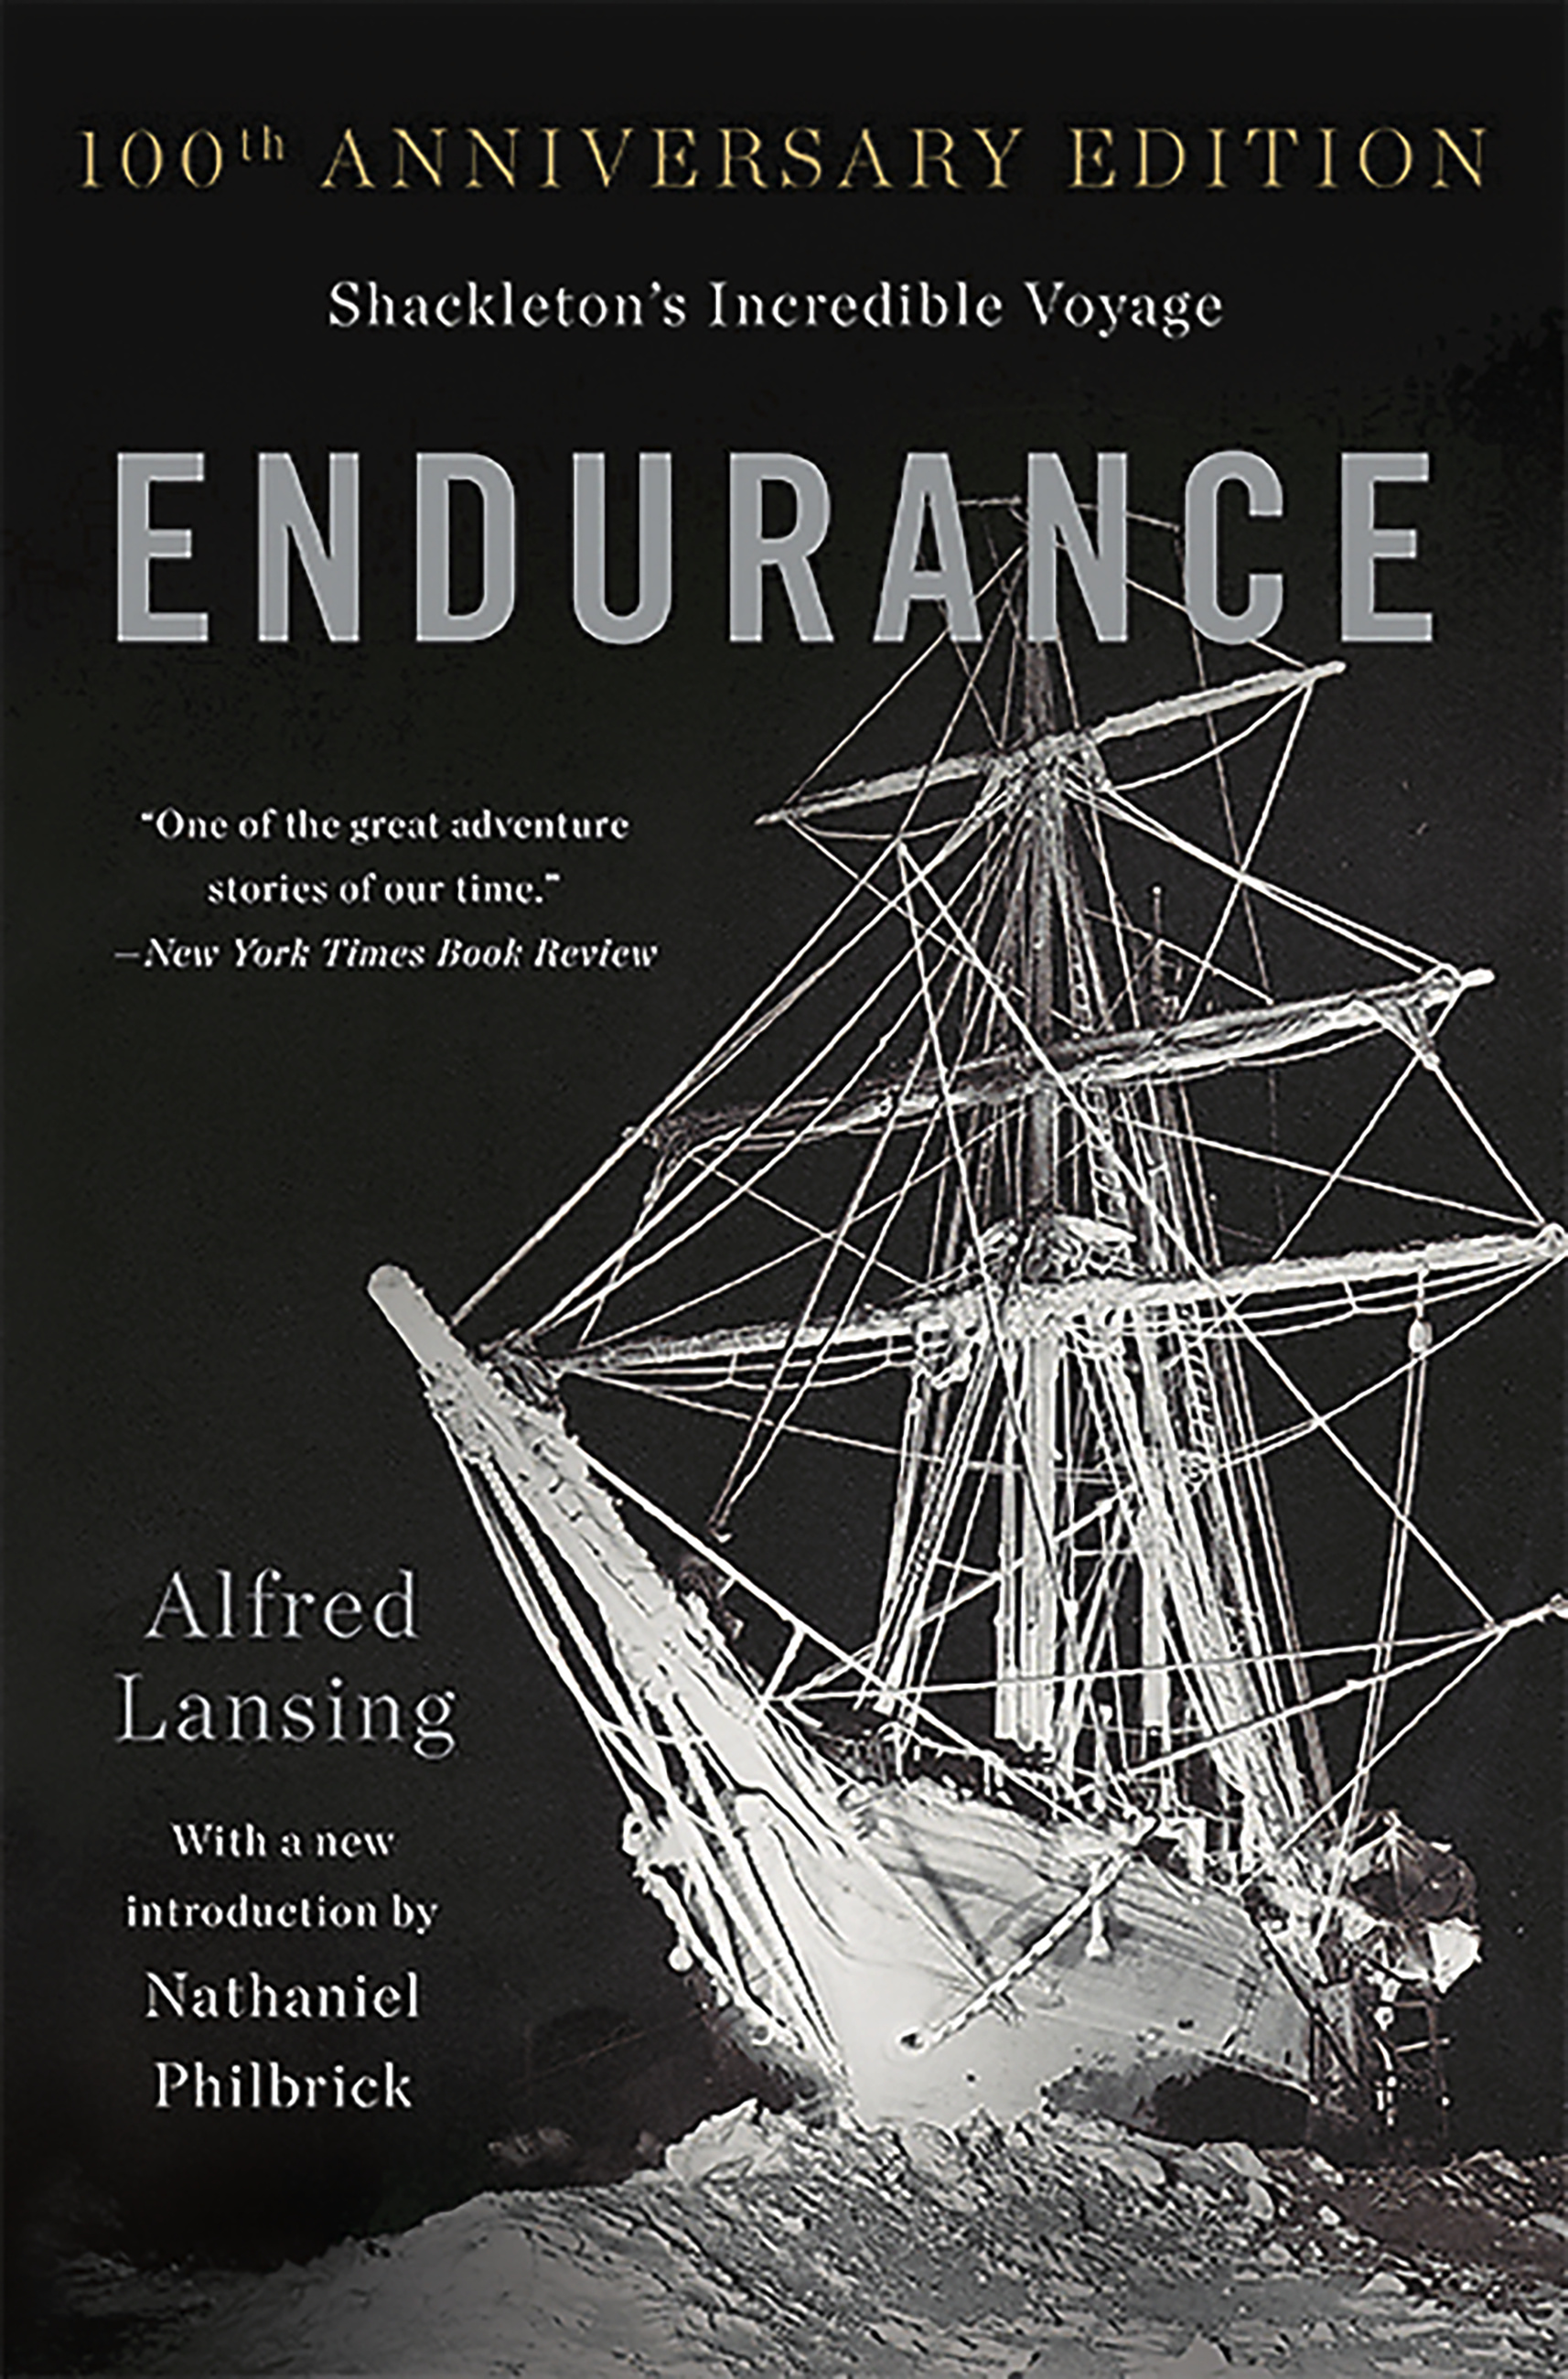 Endurance by Alfred Lansing | Hachette Book Group | Basic Books